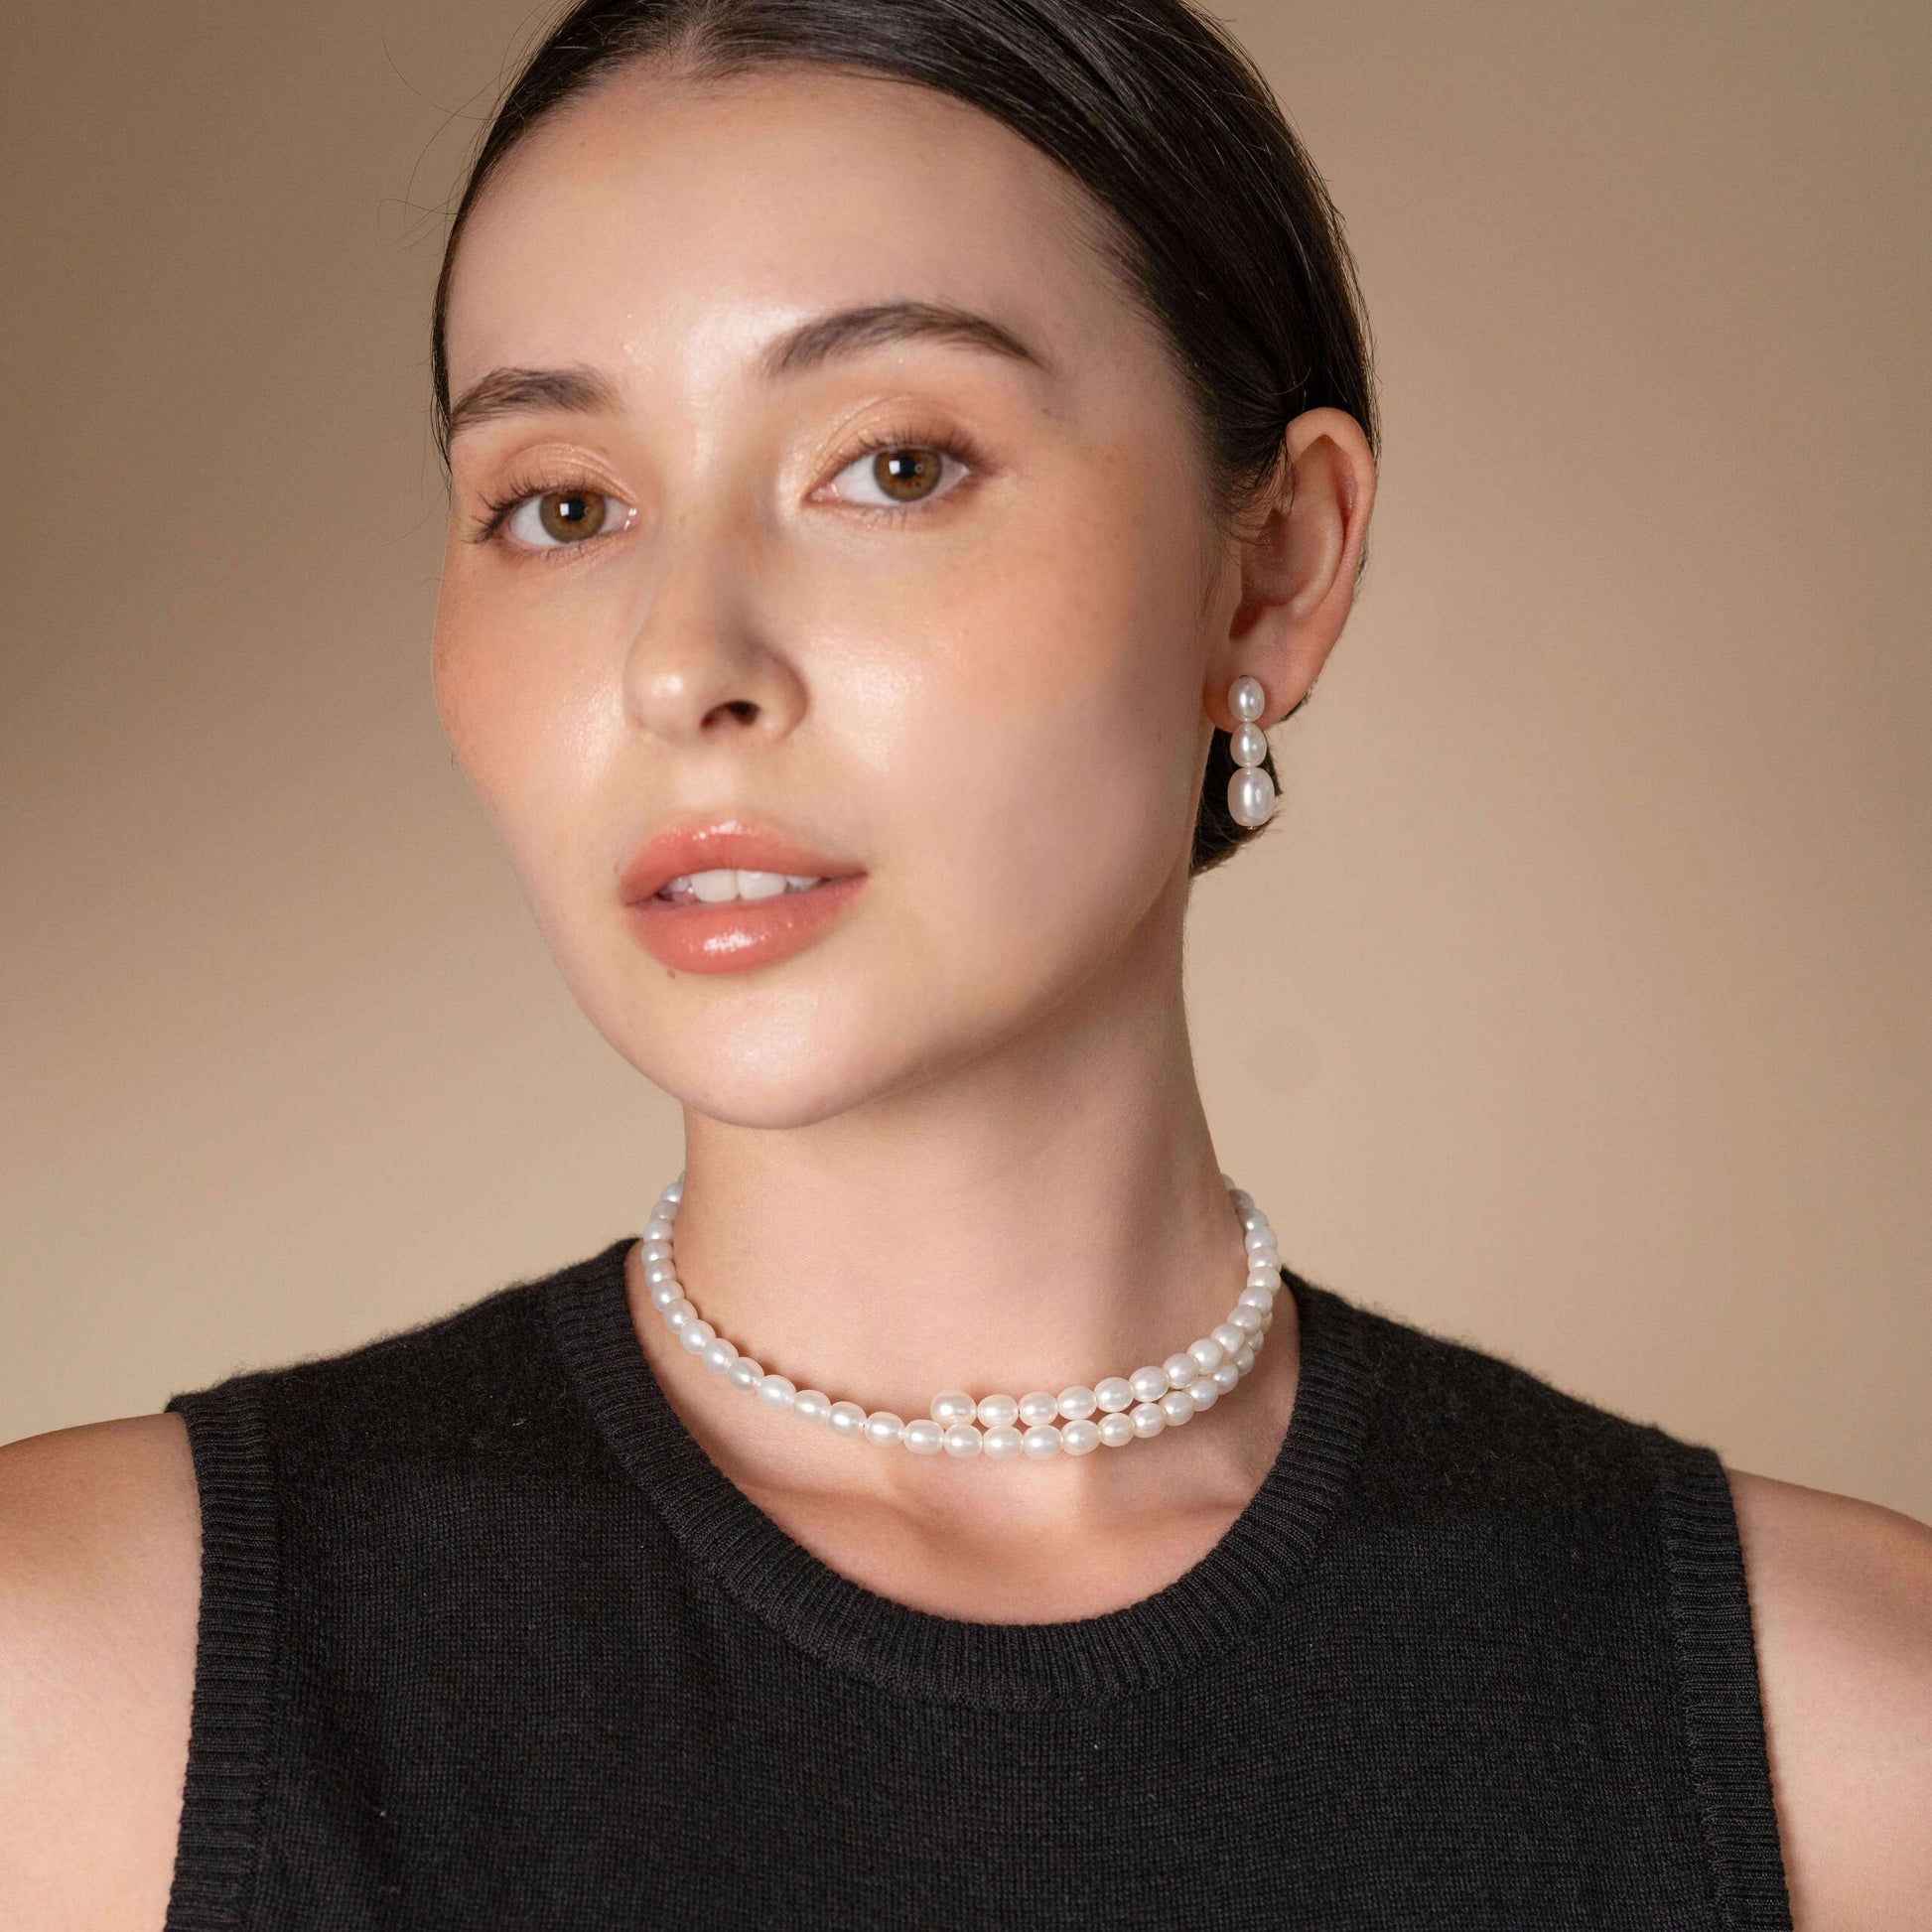 Elevate your style with a woman adorned in a pearl necklace and earrings. Timeless beauty!